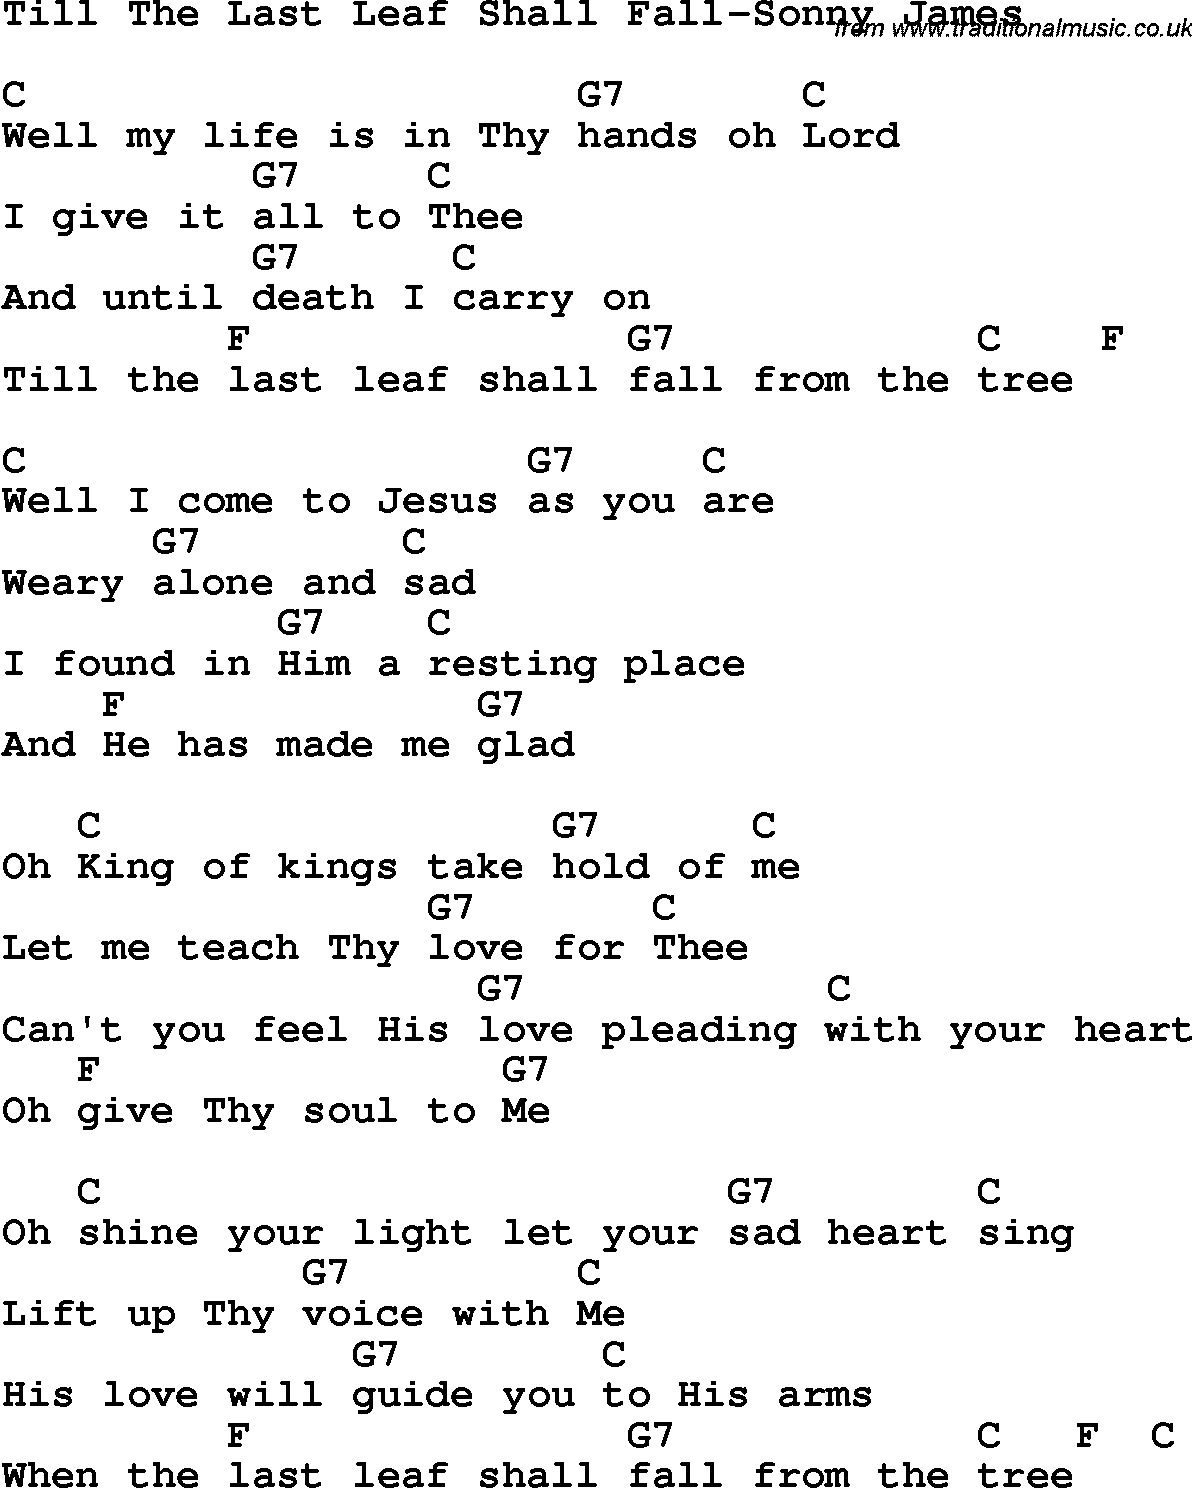 Country, Southern and Bluegrass Gospel Song Till The Last Leaf Shall Fall-Sonny James lyrics and chords